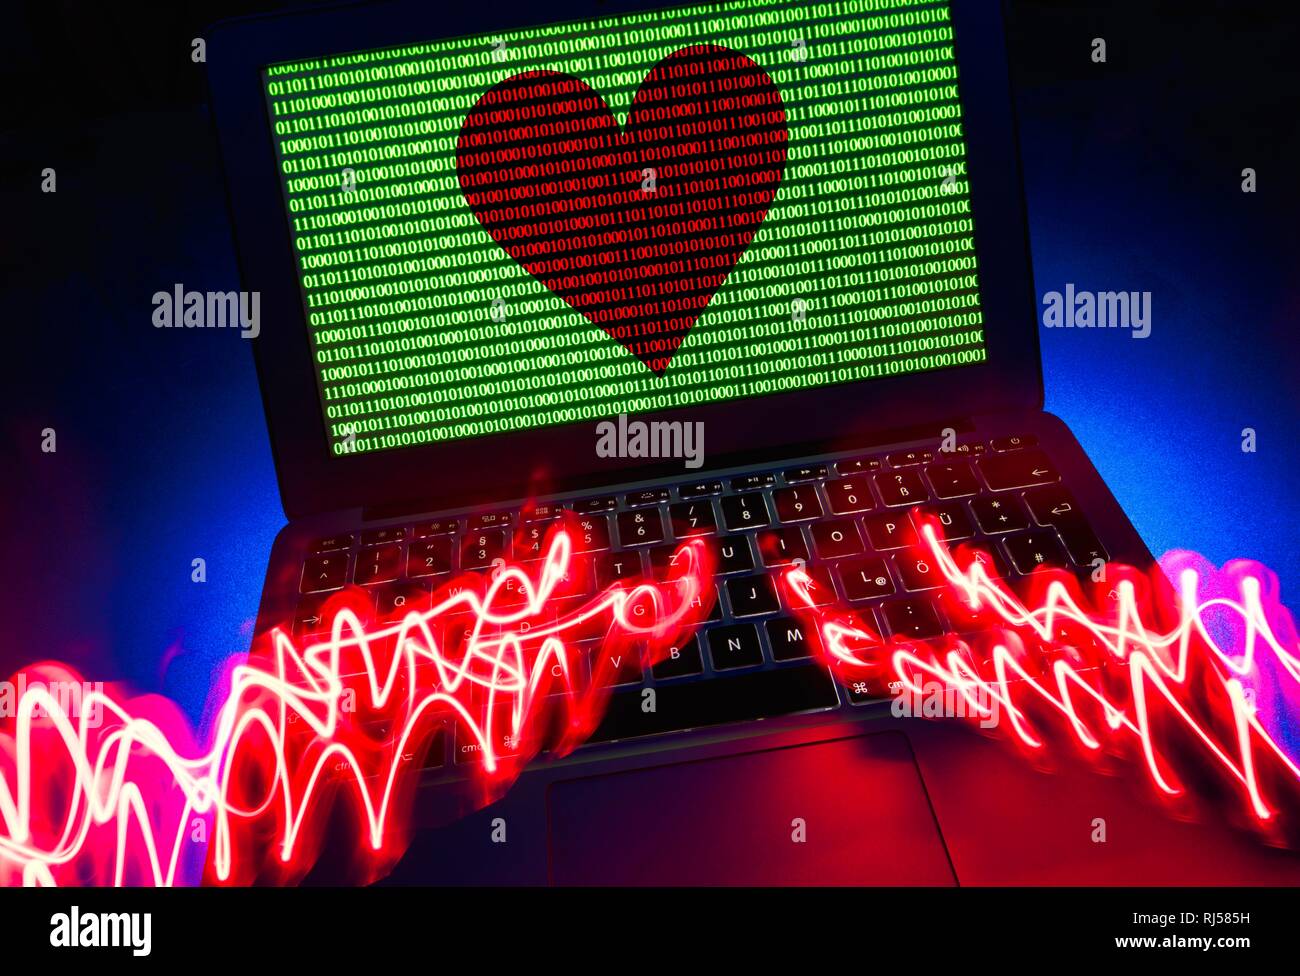 Laptop screen, symbol image partnership agency, dating agency, red heart and binary numbers on screen, symbol image cybercrime Stock Photo